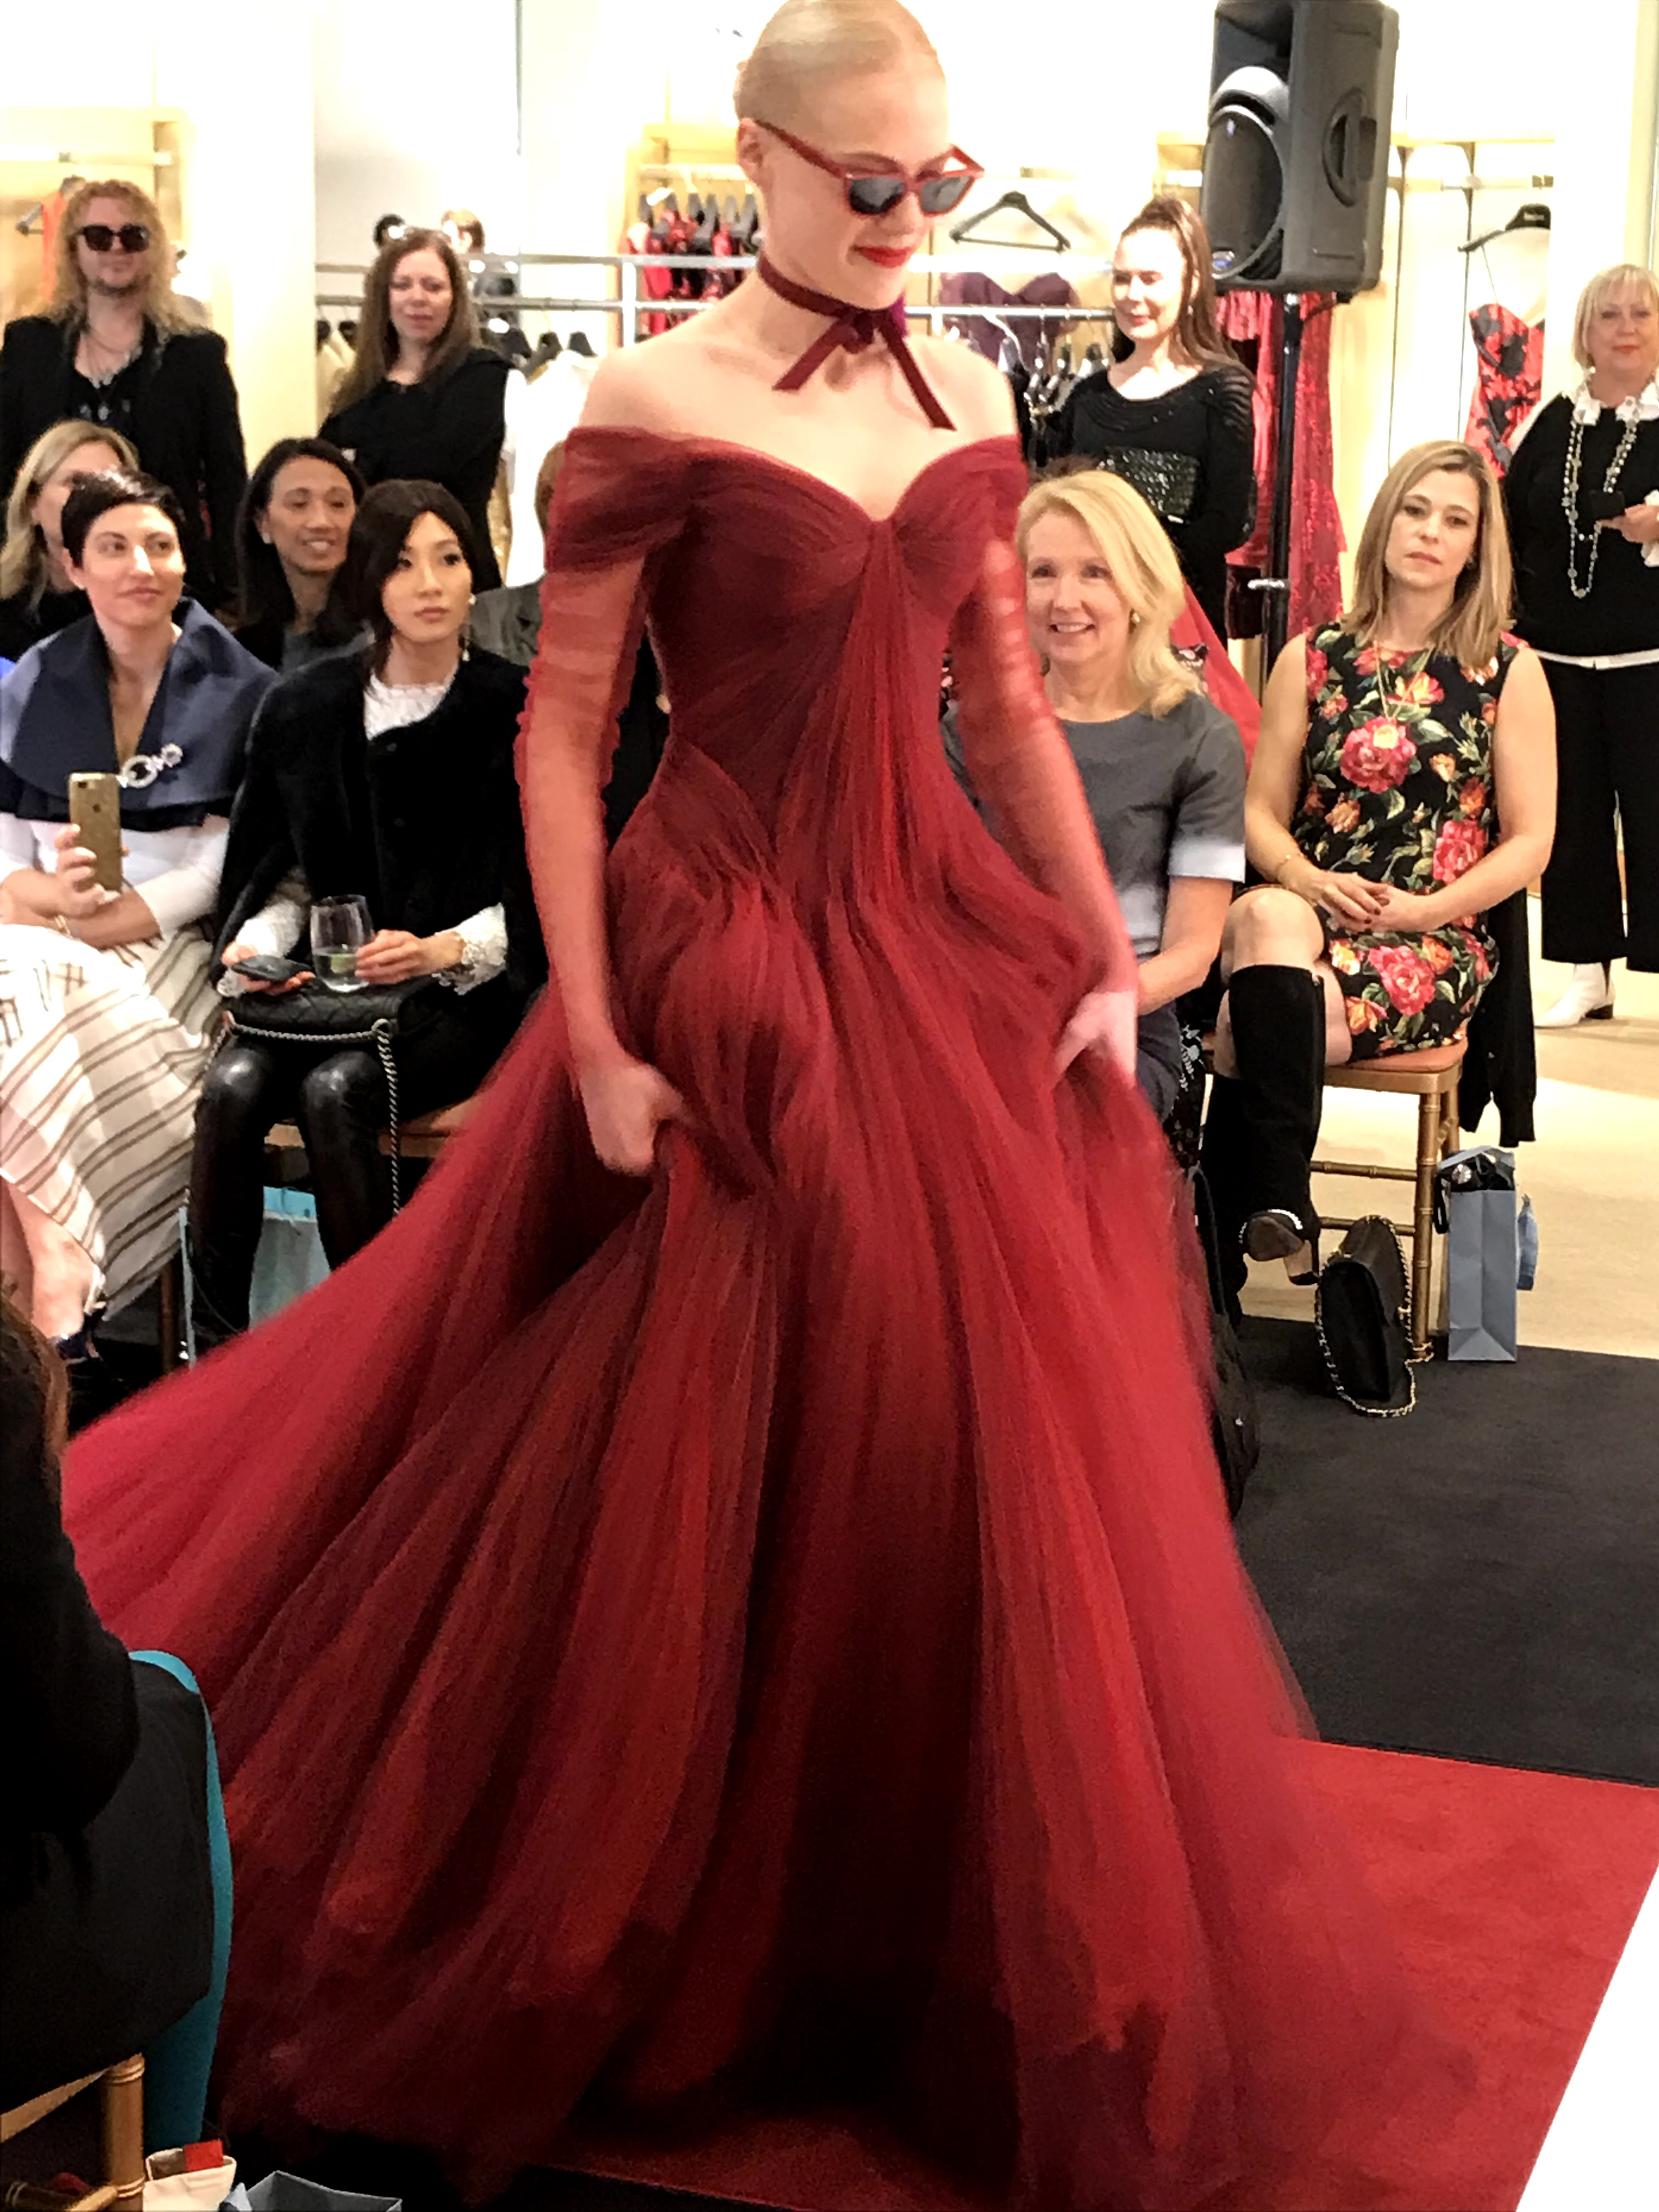 Model in red dress at fashion show